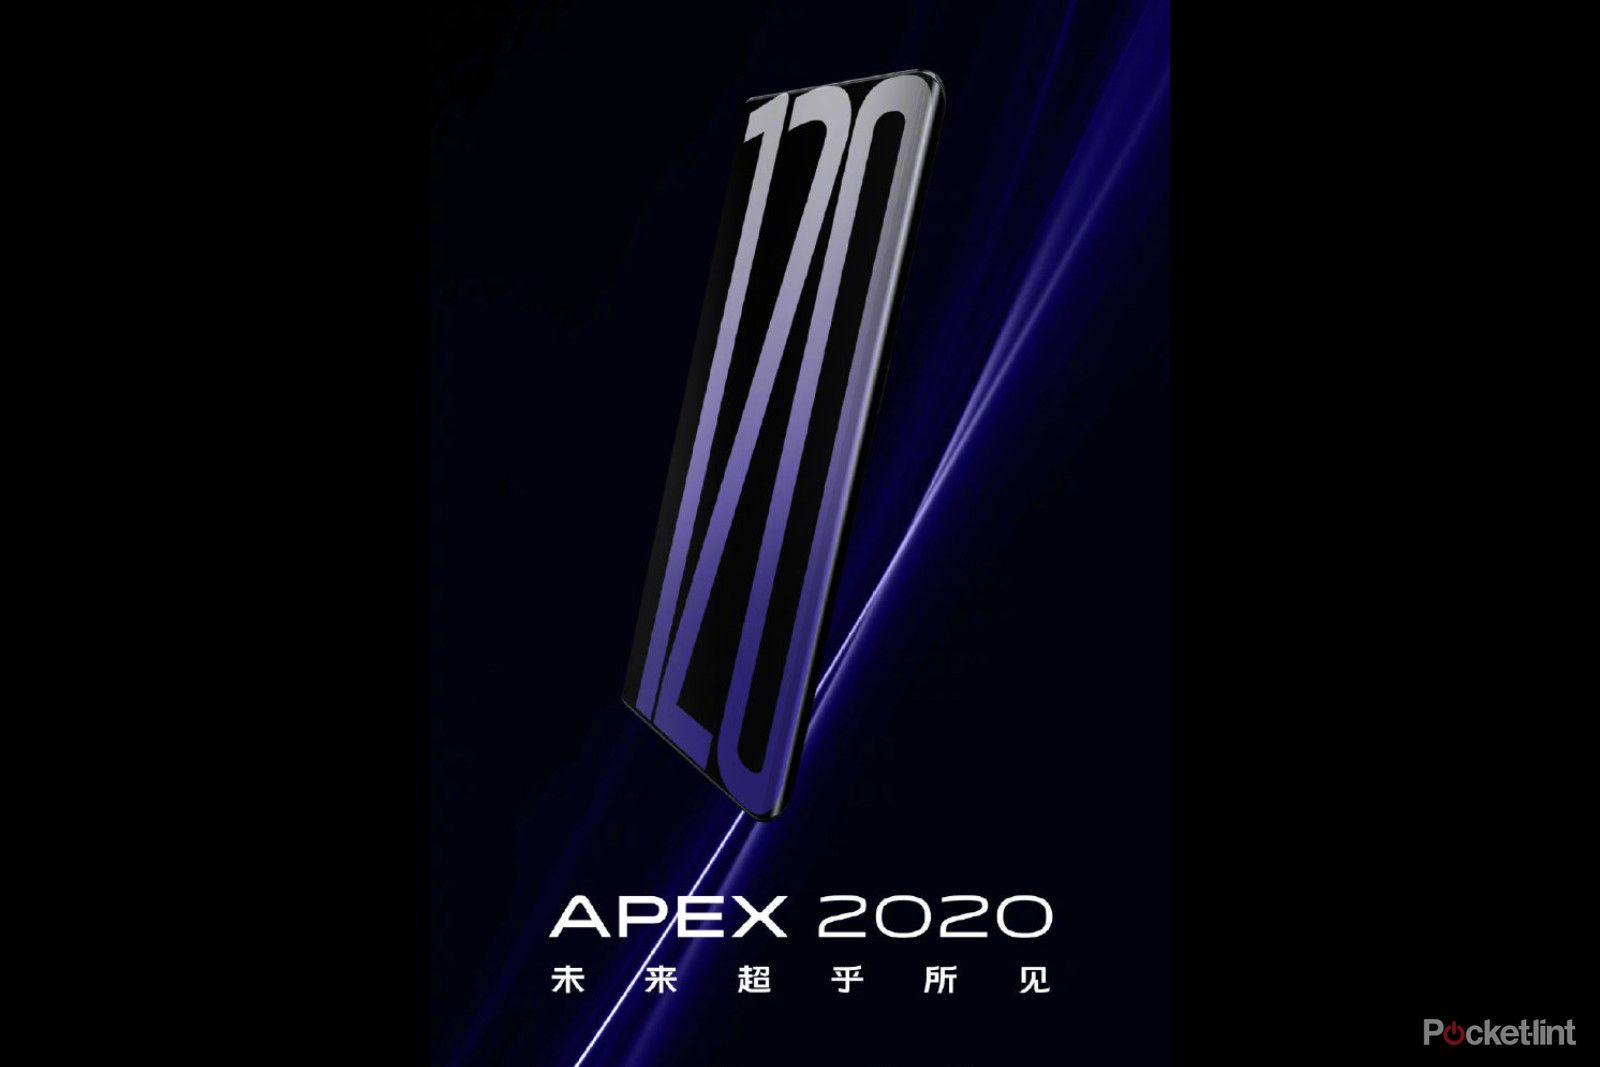 Vivo Apex 2020 concept phone to launch on 28 February with 120Hz waterfall display image 1